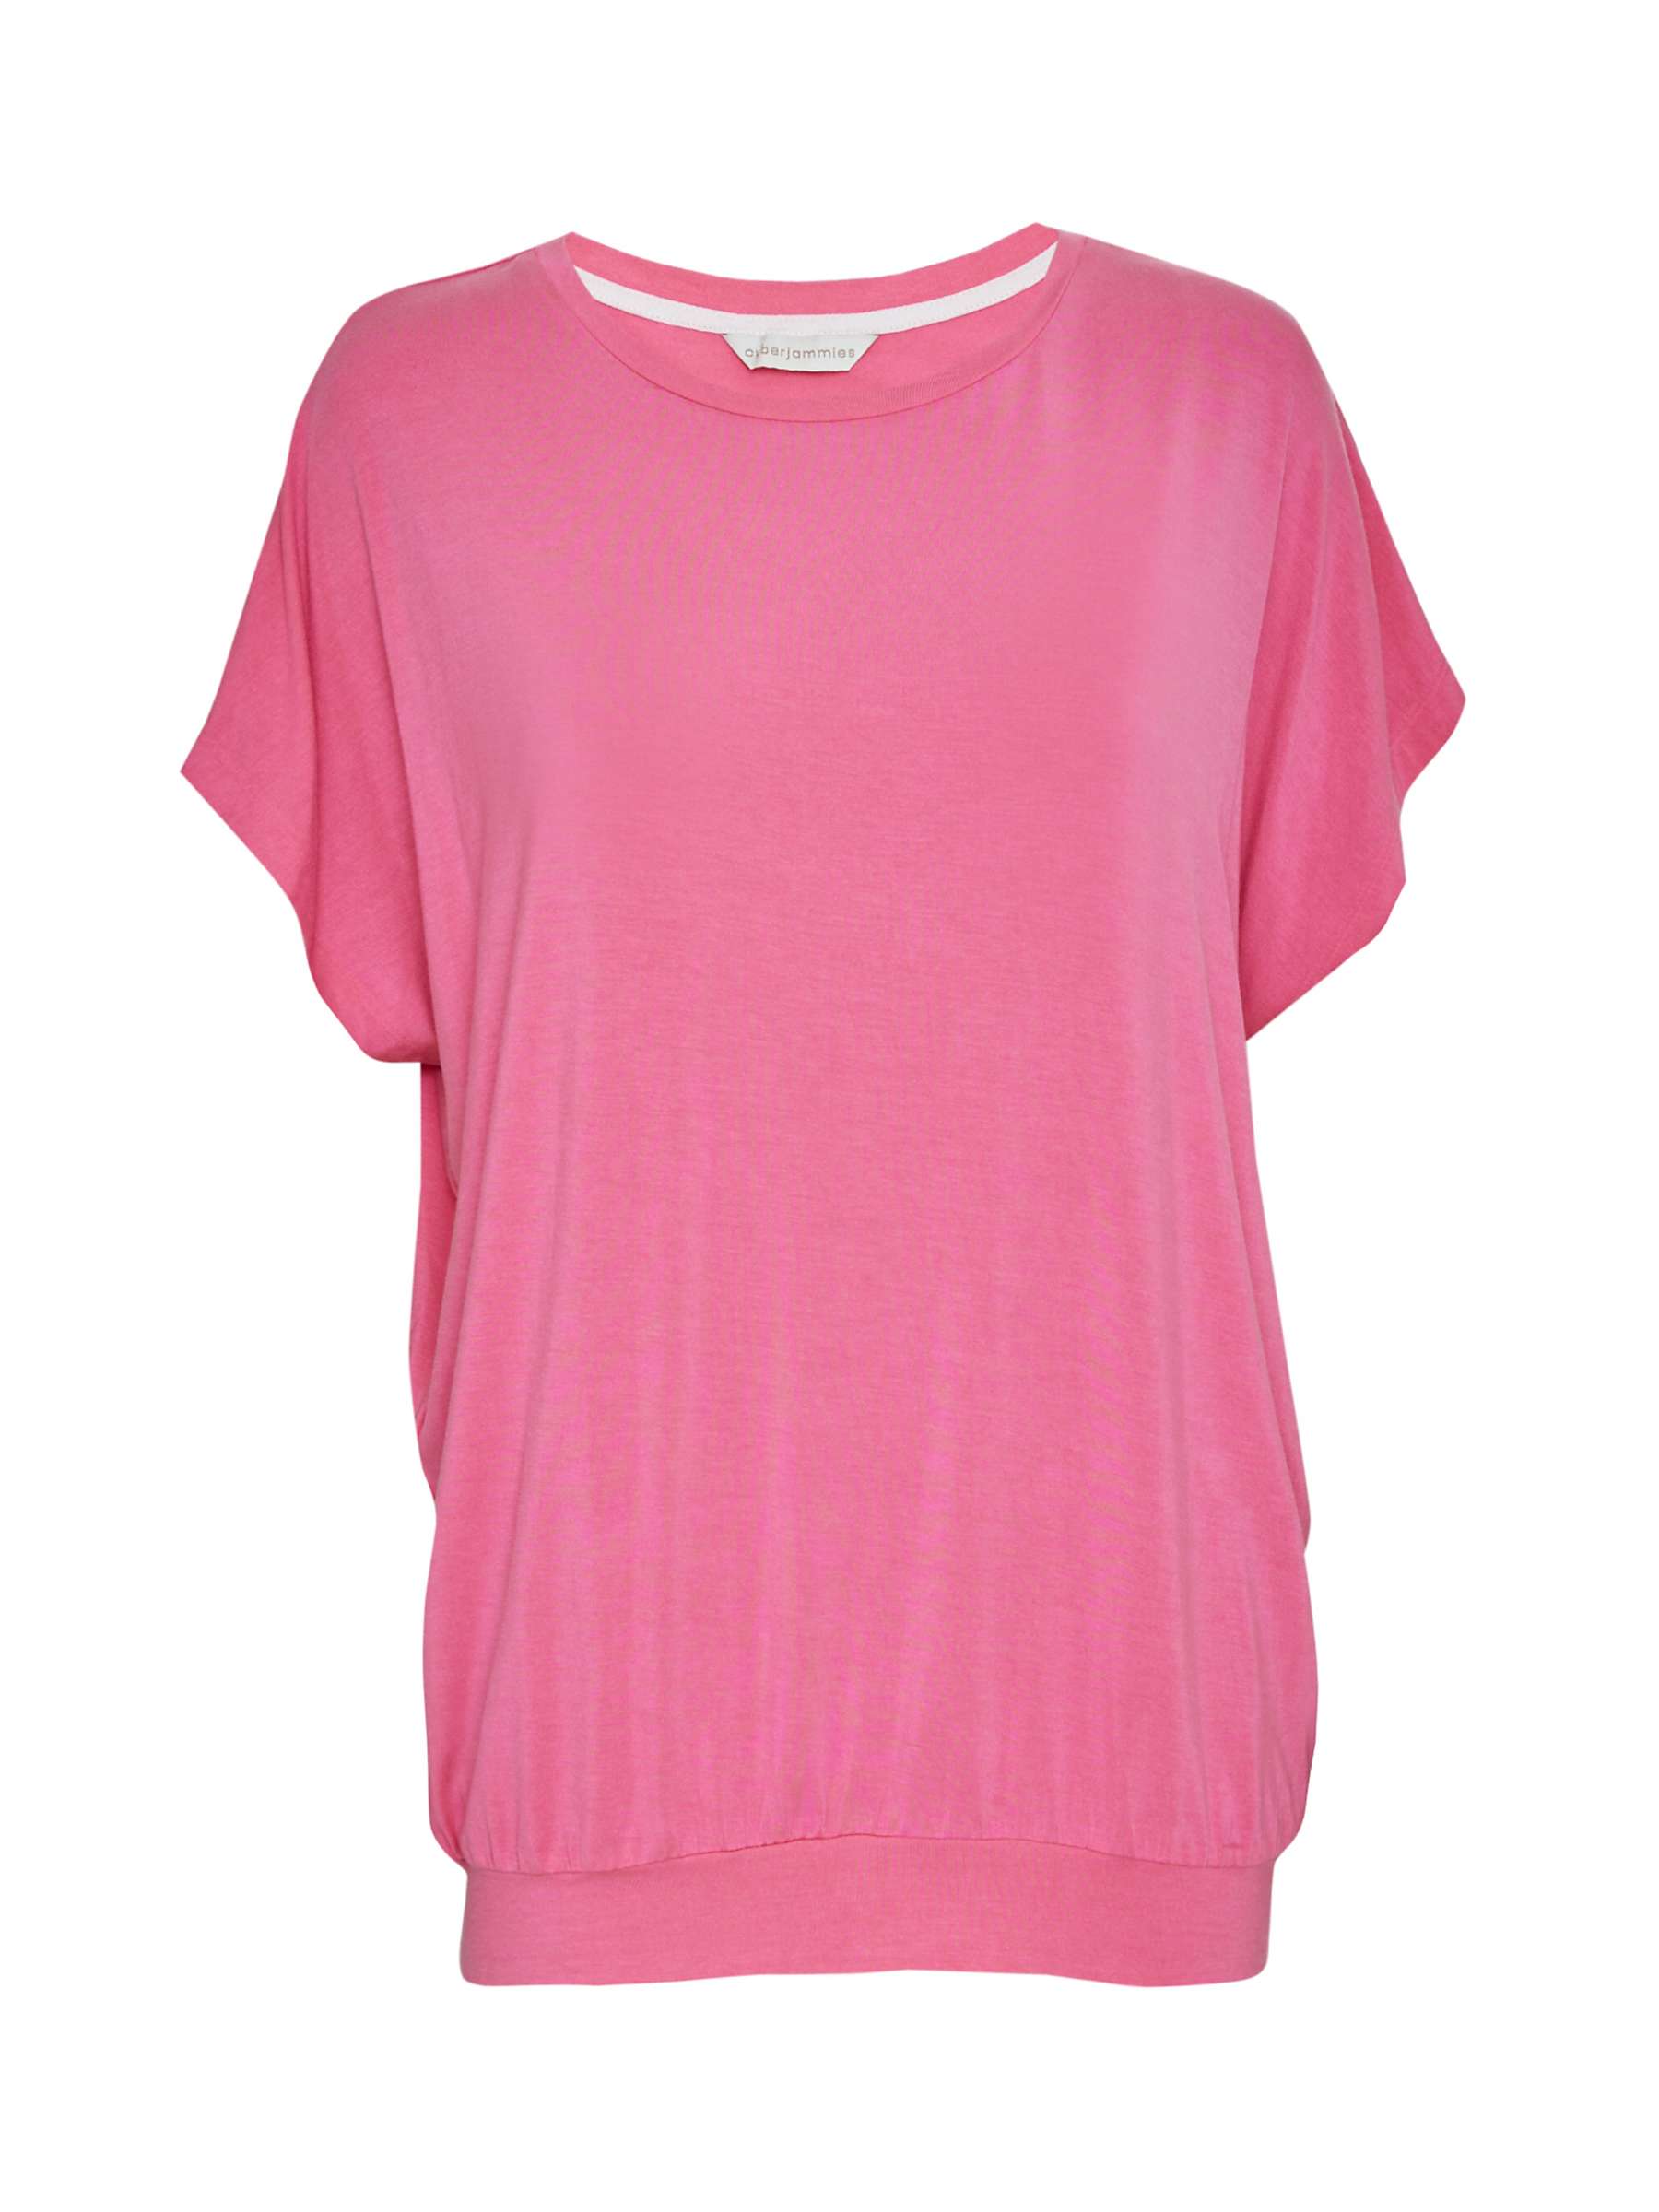 Buy Cyberjammies Shelly Jersey Slouch Pyjama Top, Pink Online at johnlewis.com